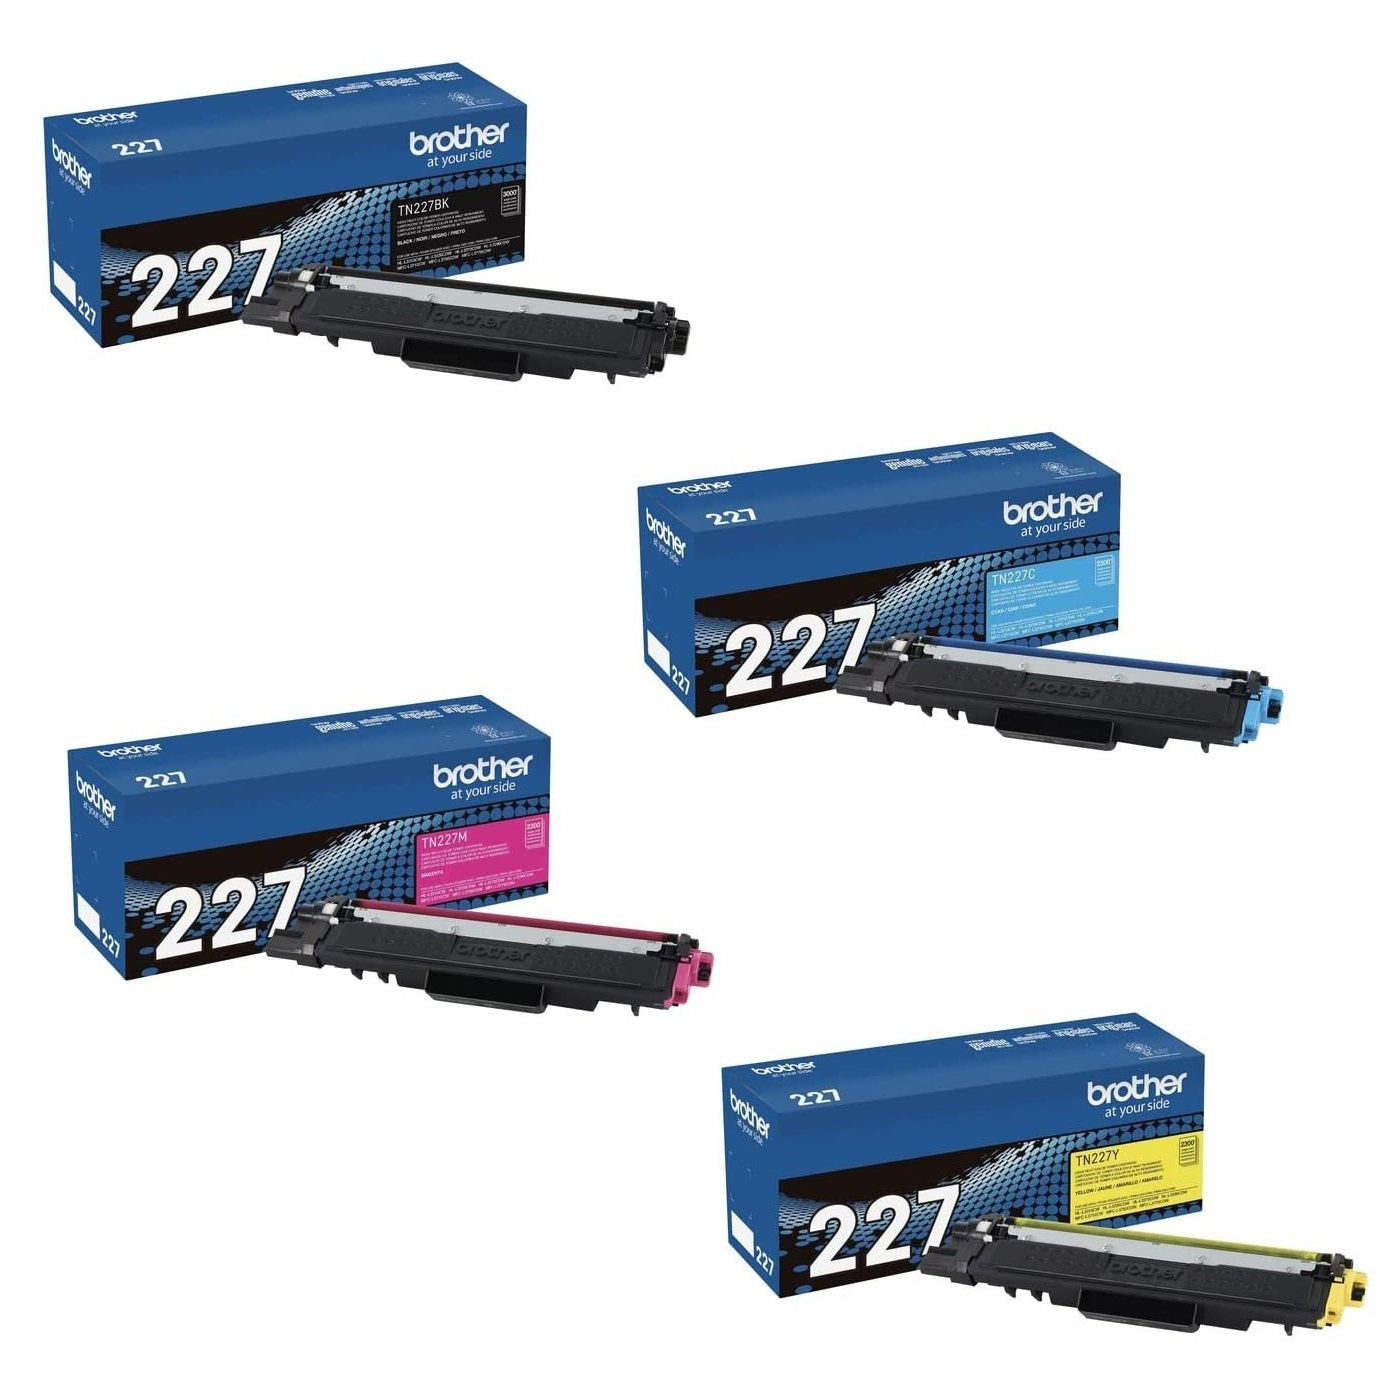 Toner Bank Compatible Toner Cartridge Replacement for Brother TN227 TN